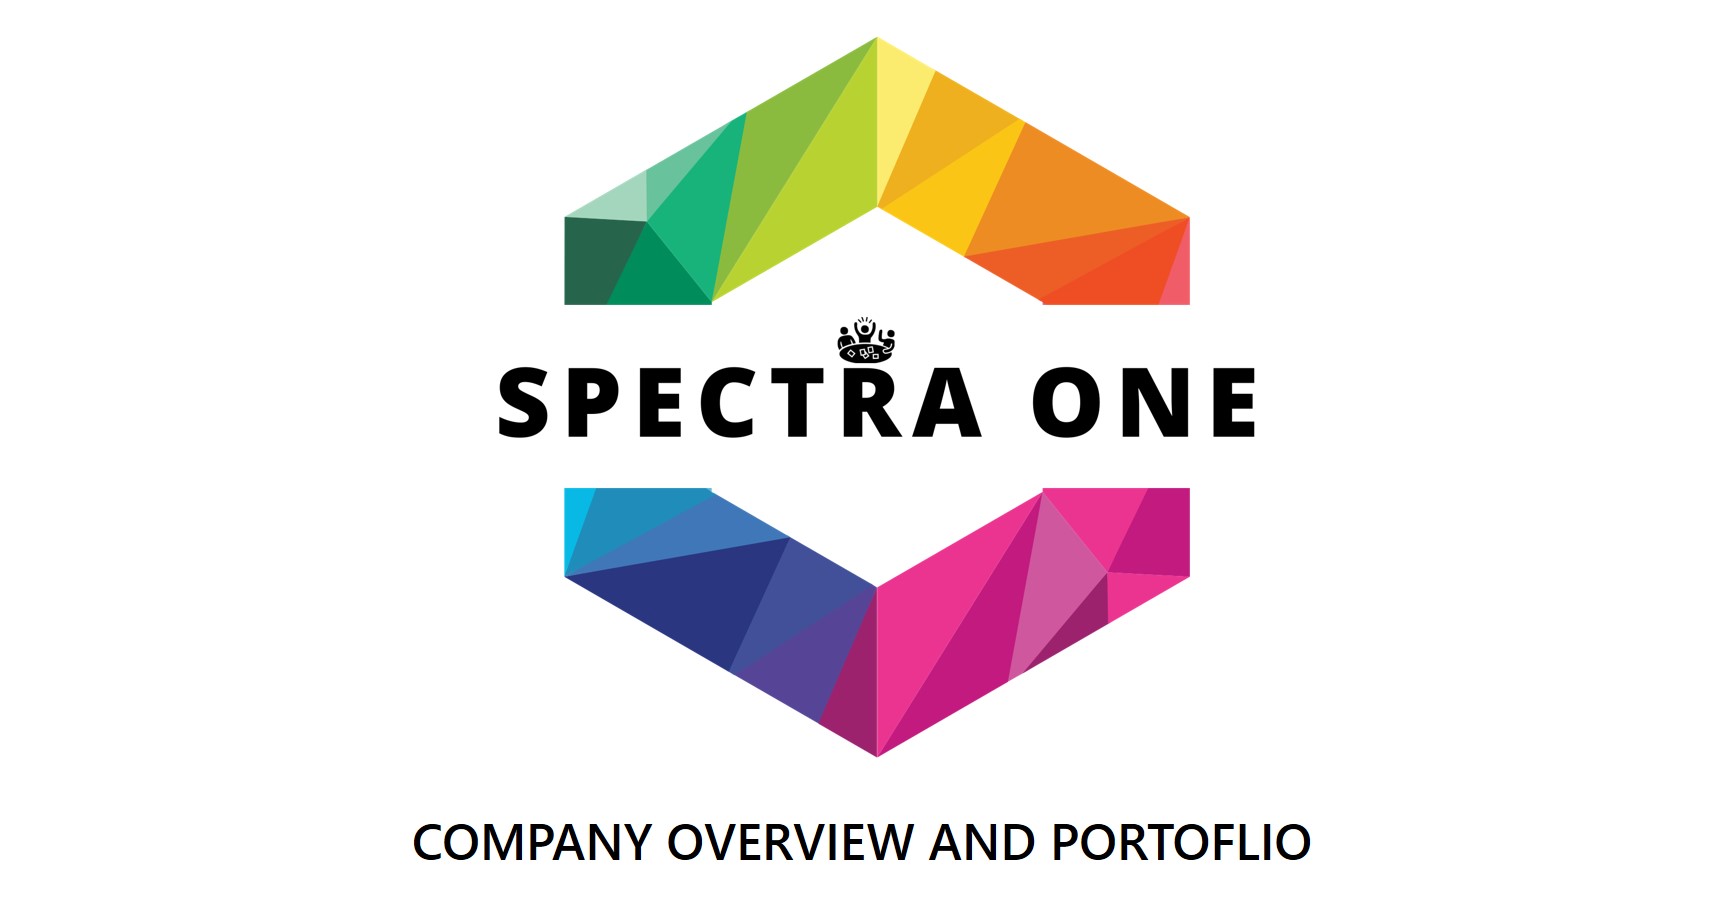 Spectra One